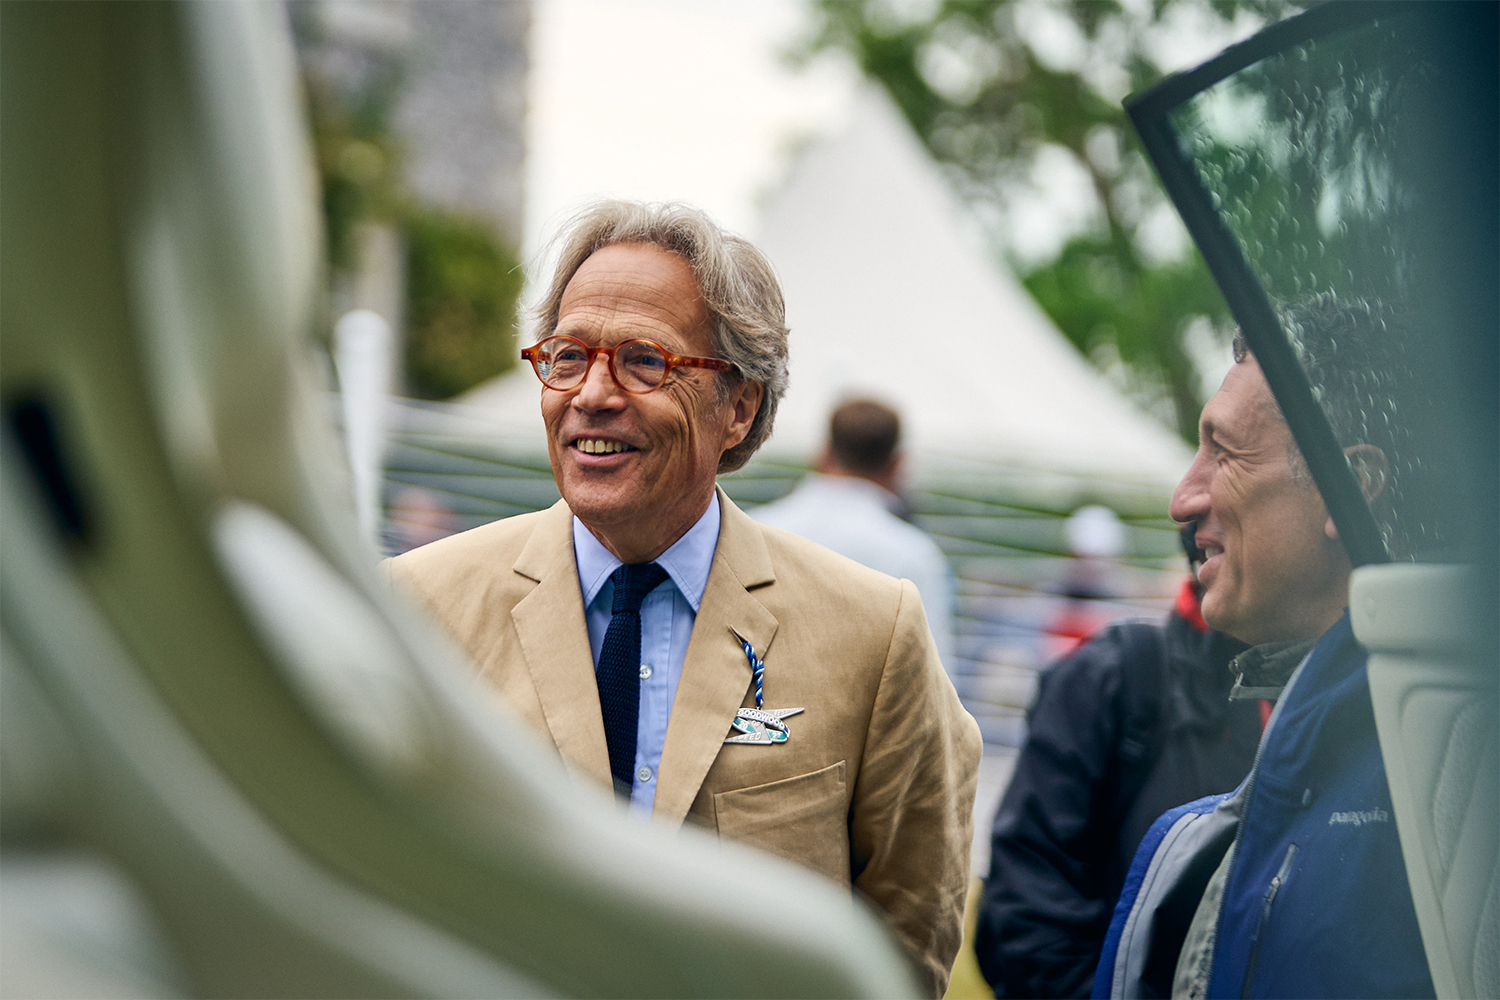 Charles Gordon-Lennox, 11th Duke of Richmond, seen here in a brown suit at the 2022 edition of the Goodwood Festival of Speed